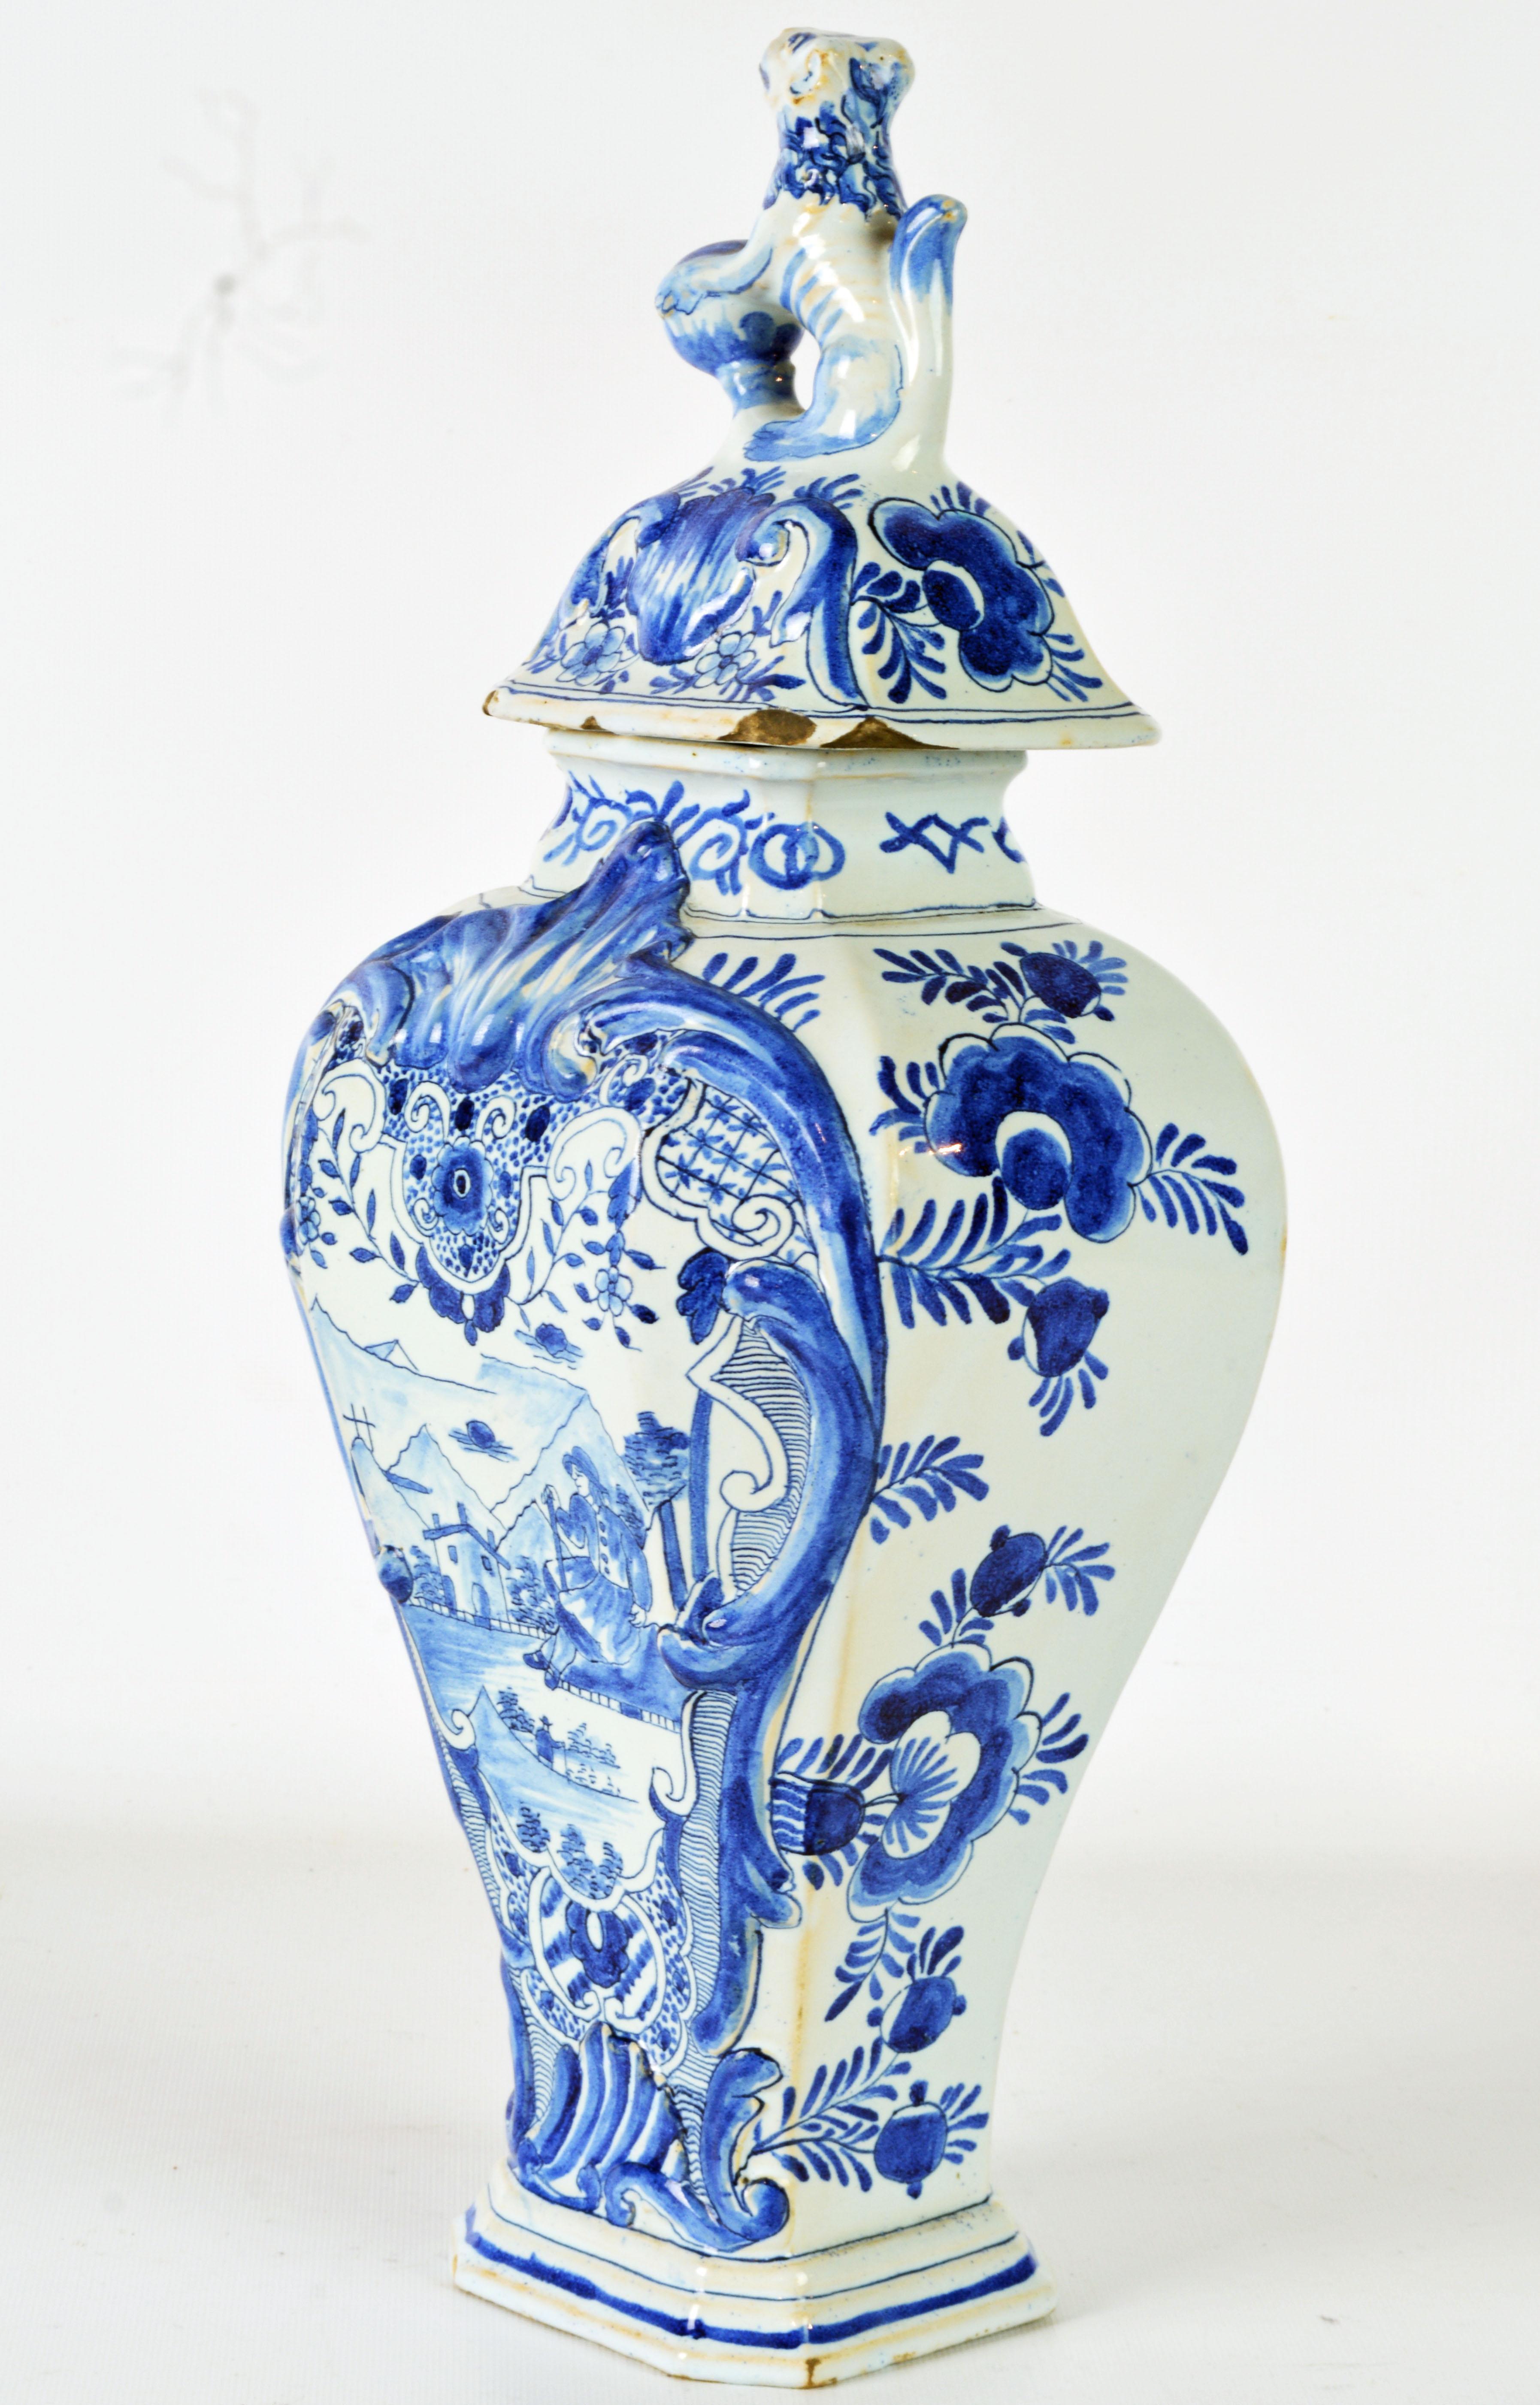 Standing almost 18 inches tall this lovely delft pottery jar features an octagonal cover with a lion clasping a sphere on top above the main baluster shape octagonal body decorated with a mountainous landscape cartouche on the front and stylized